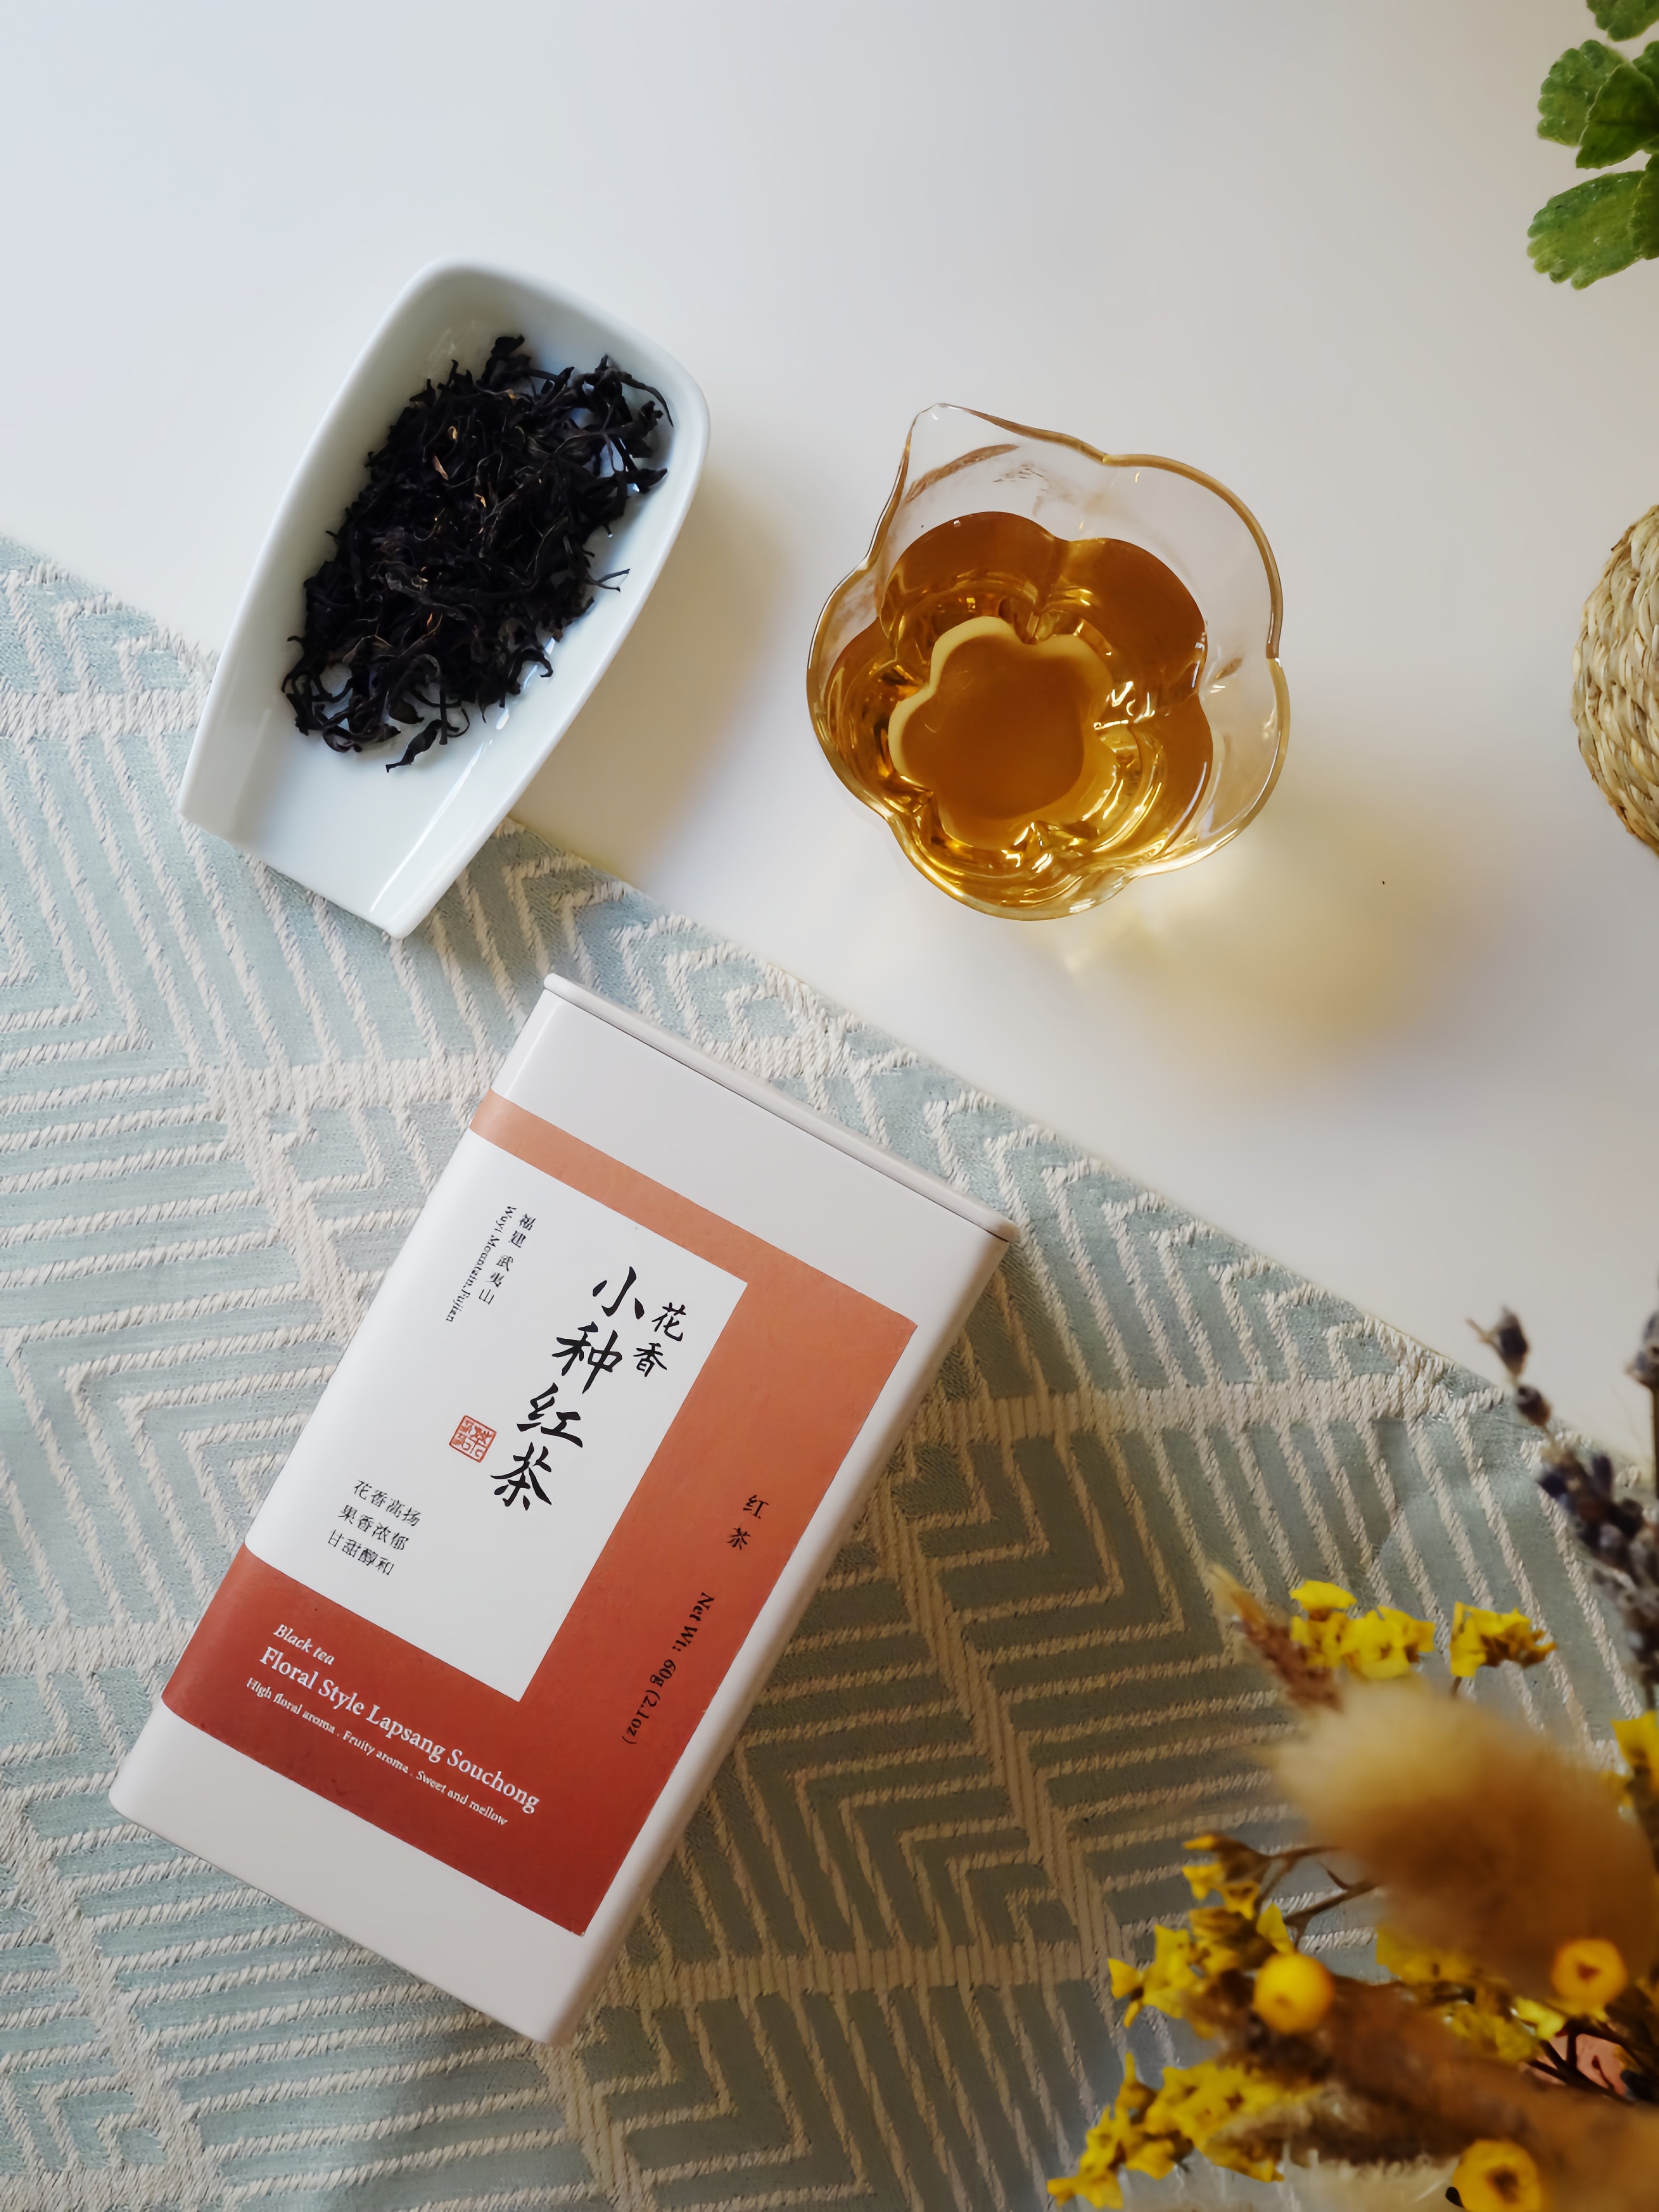 Lapsang Souchong (floral style) 花香小种红茶– ZhaoTea